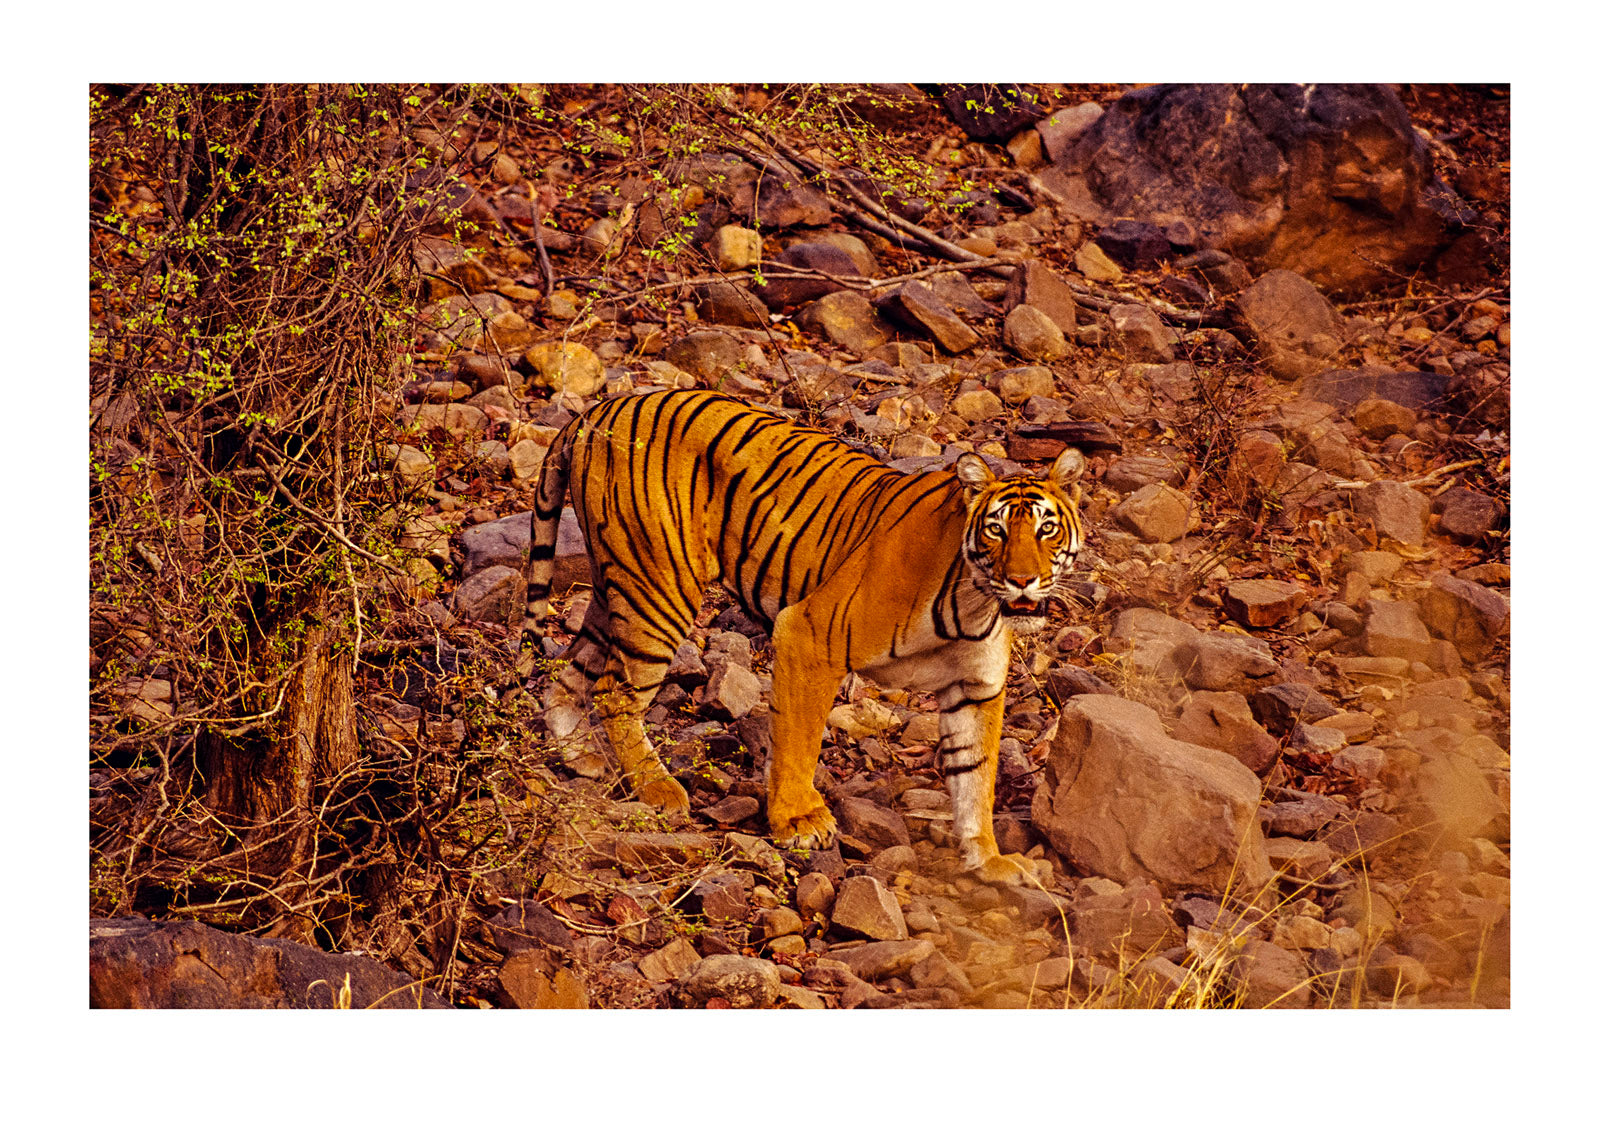 A camouflaged female Bengal Tiger stalks prey along a dry river bed. Ranthambhore National Park, India.